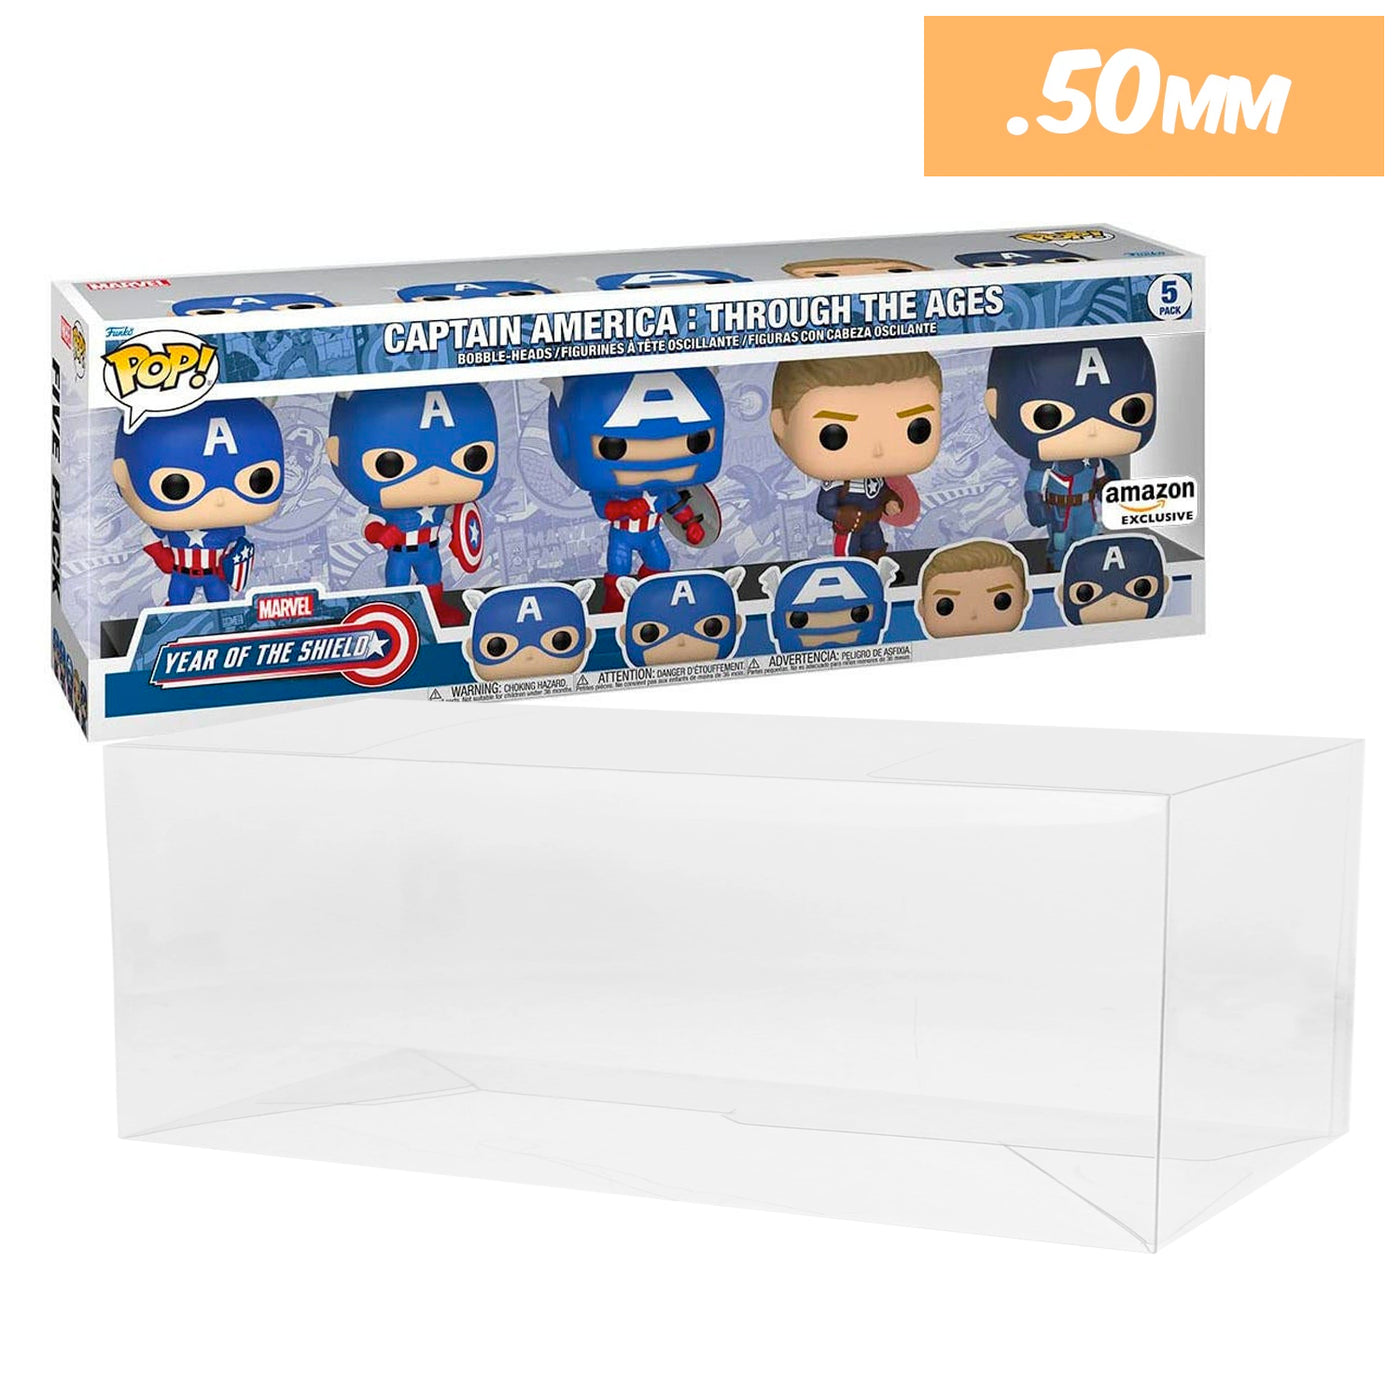 amazon captain america 5 pack best funko pop protectors thick strong uv scratch flat top stack vinyl display geek plastic shield vaulted eco armor fits collect protect display case kollector protector